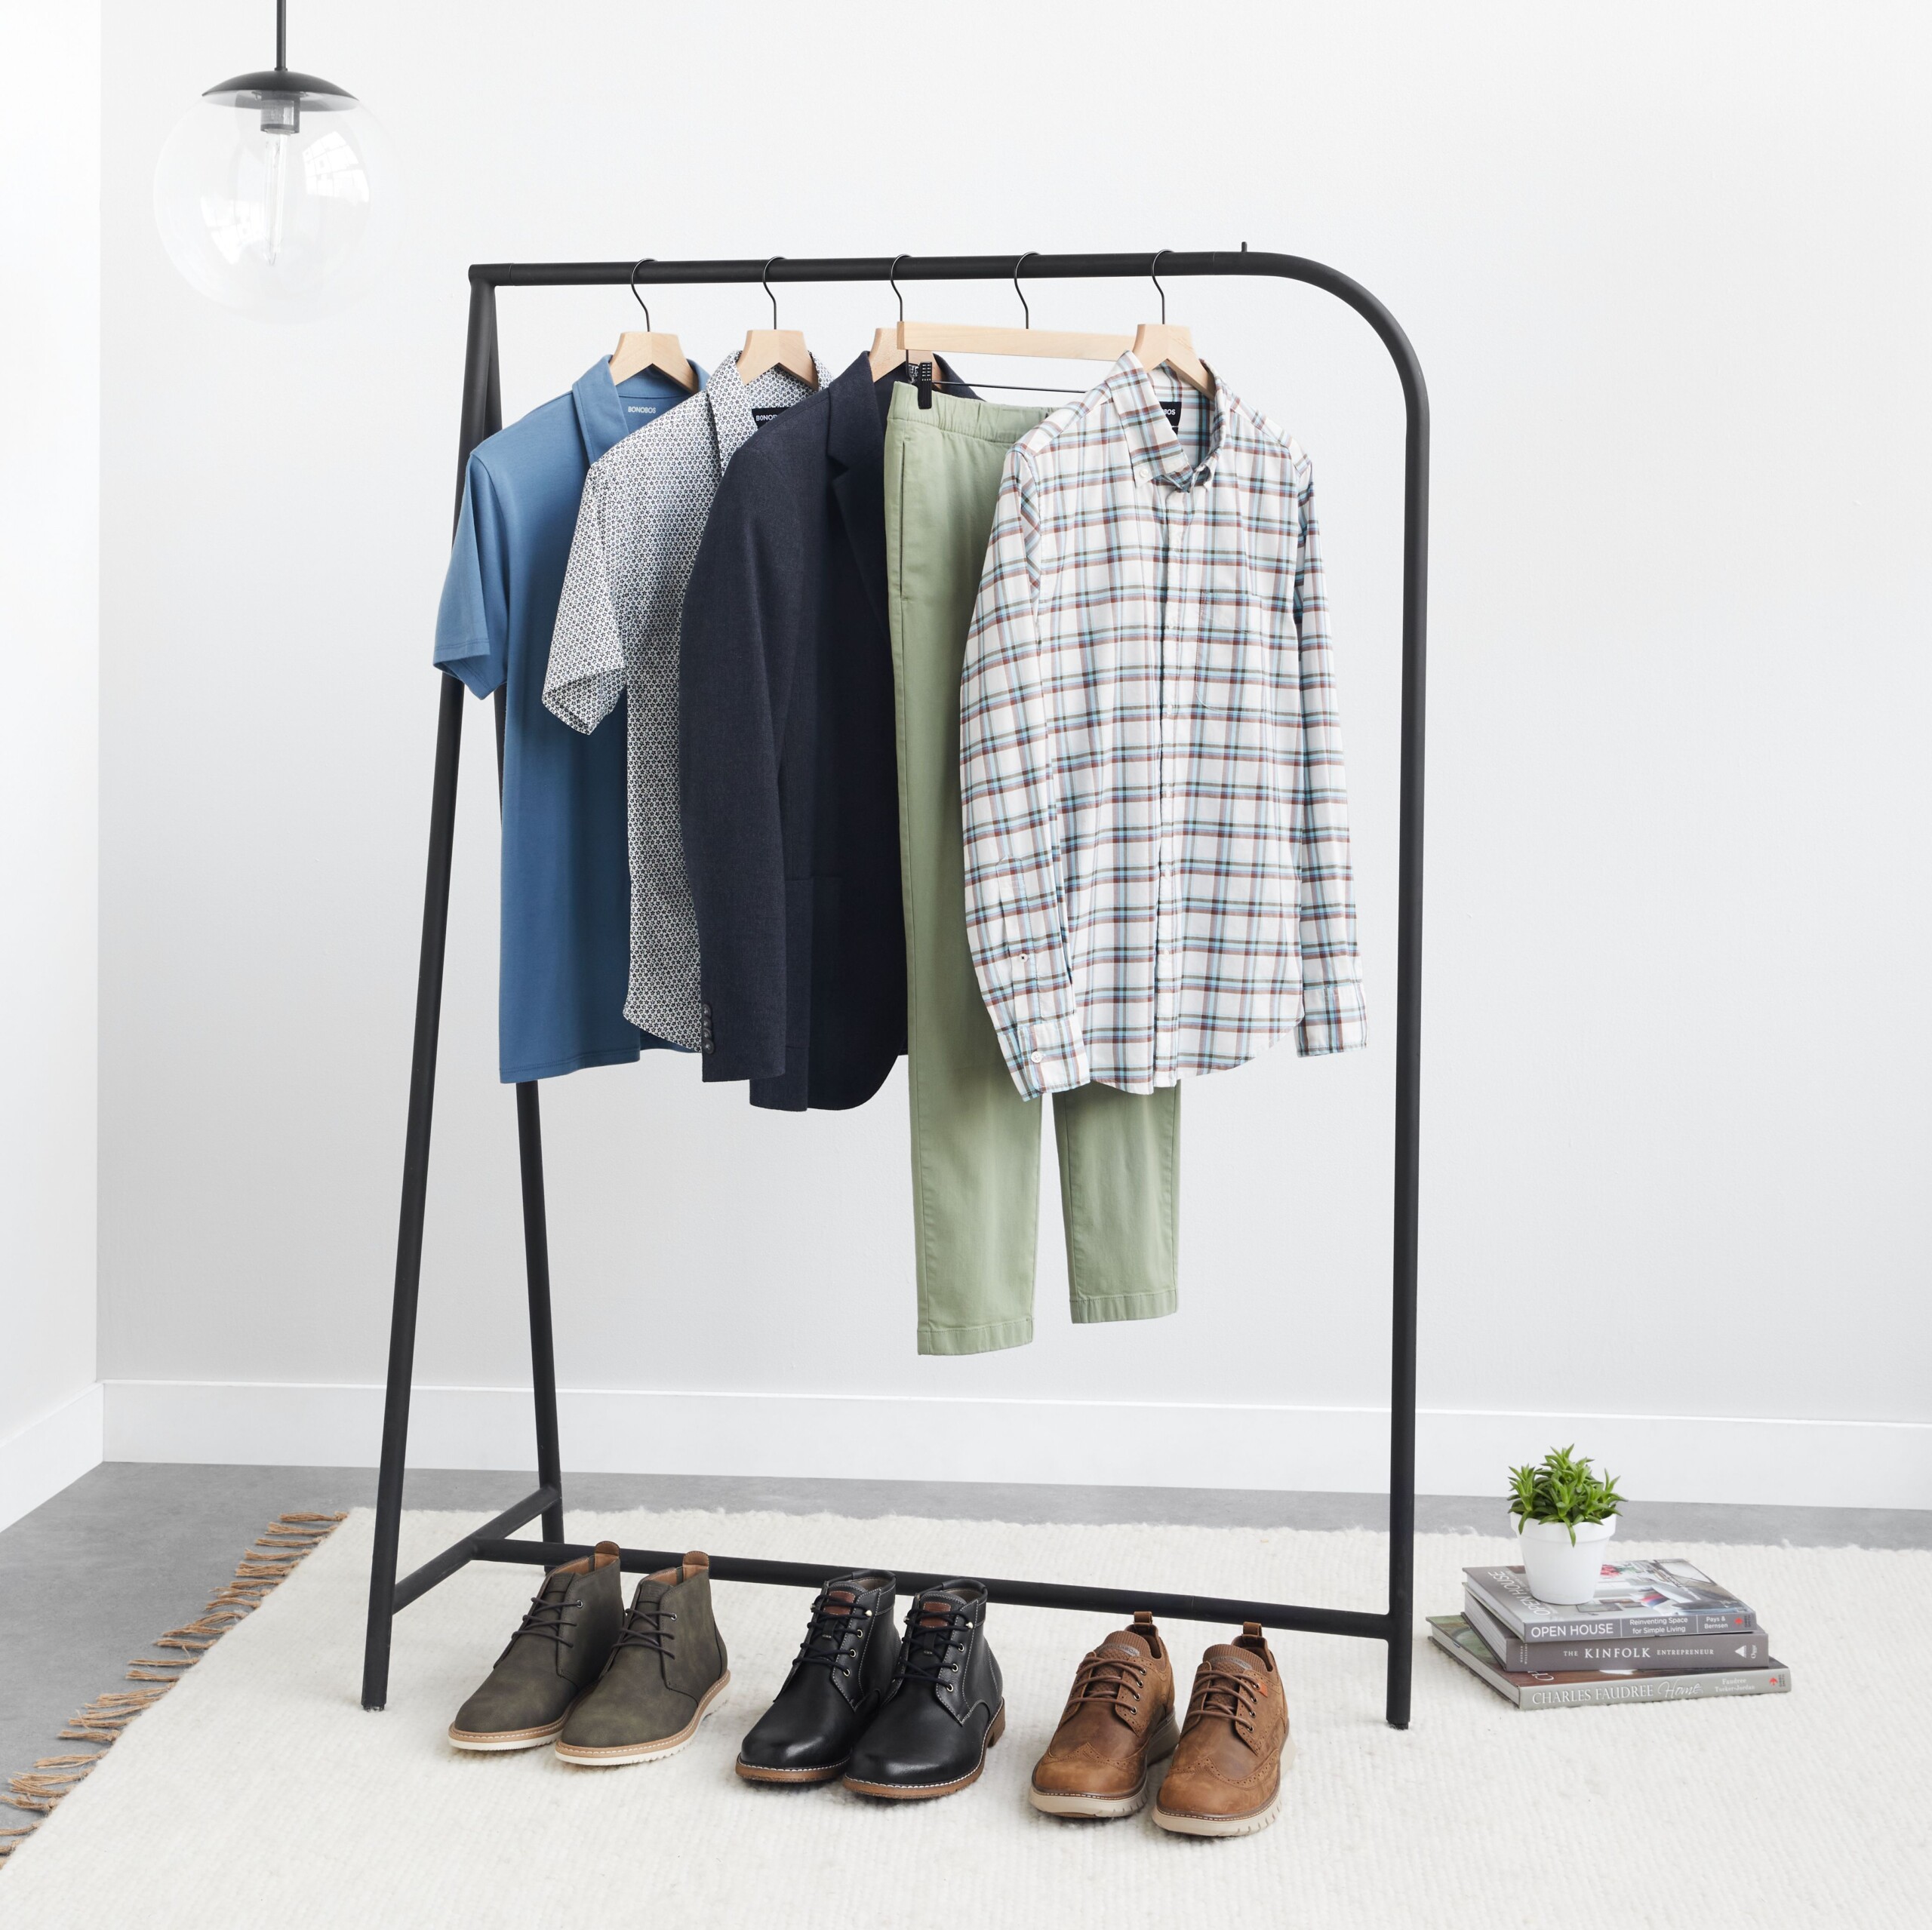 Men's Business Casual | Style Guide | Stitch Fix